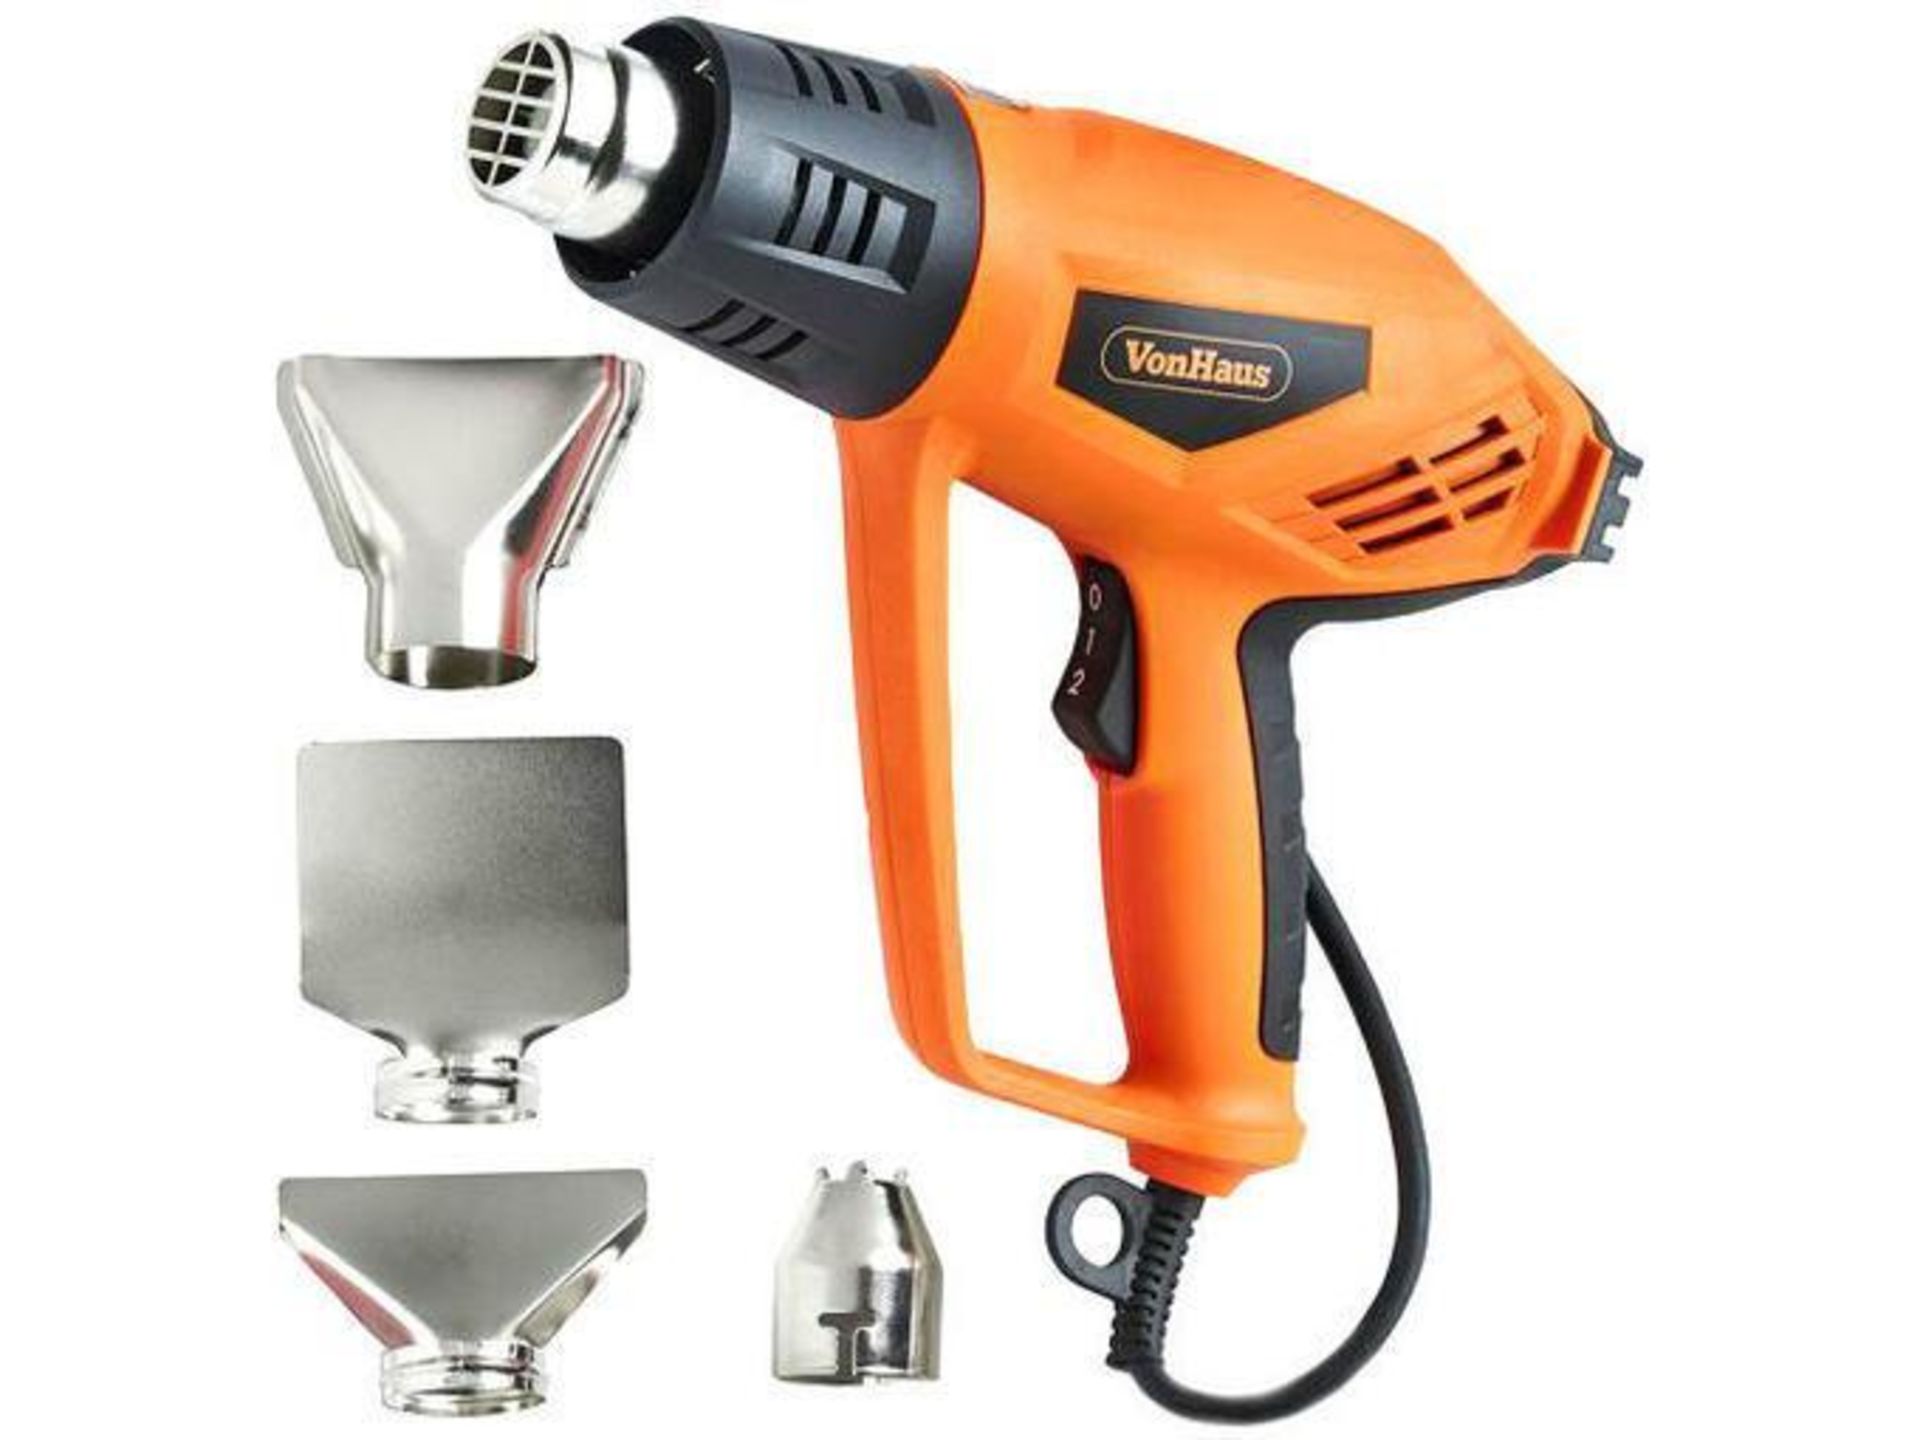 2000W Heat Gun (ER32) Ever tried scraping off paint or taking up vinyl flooring with hand tools